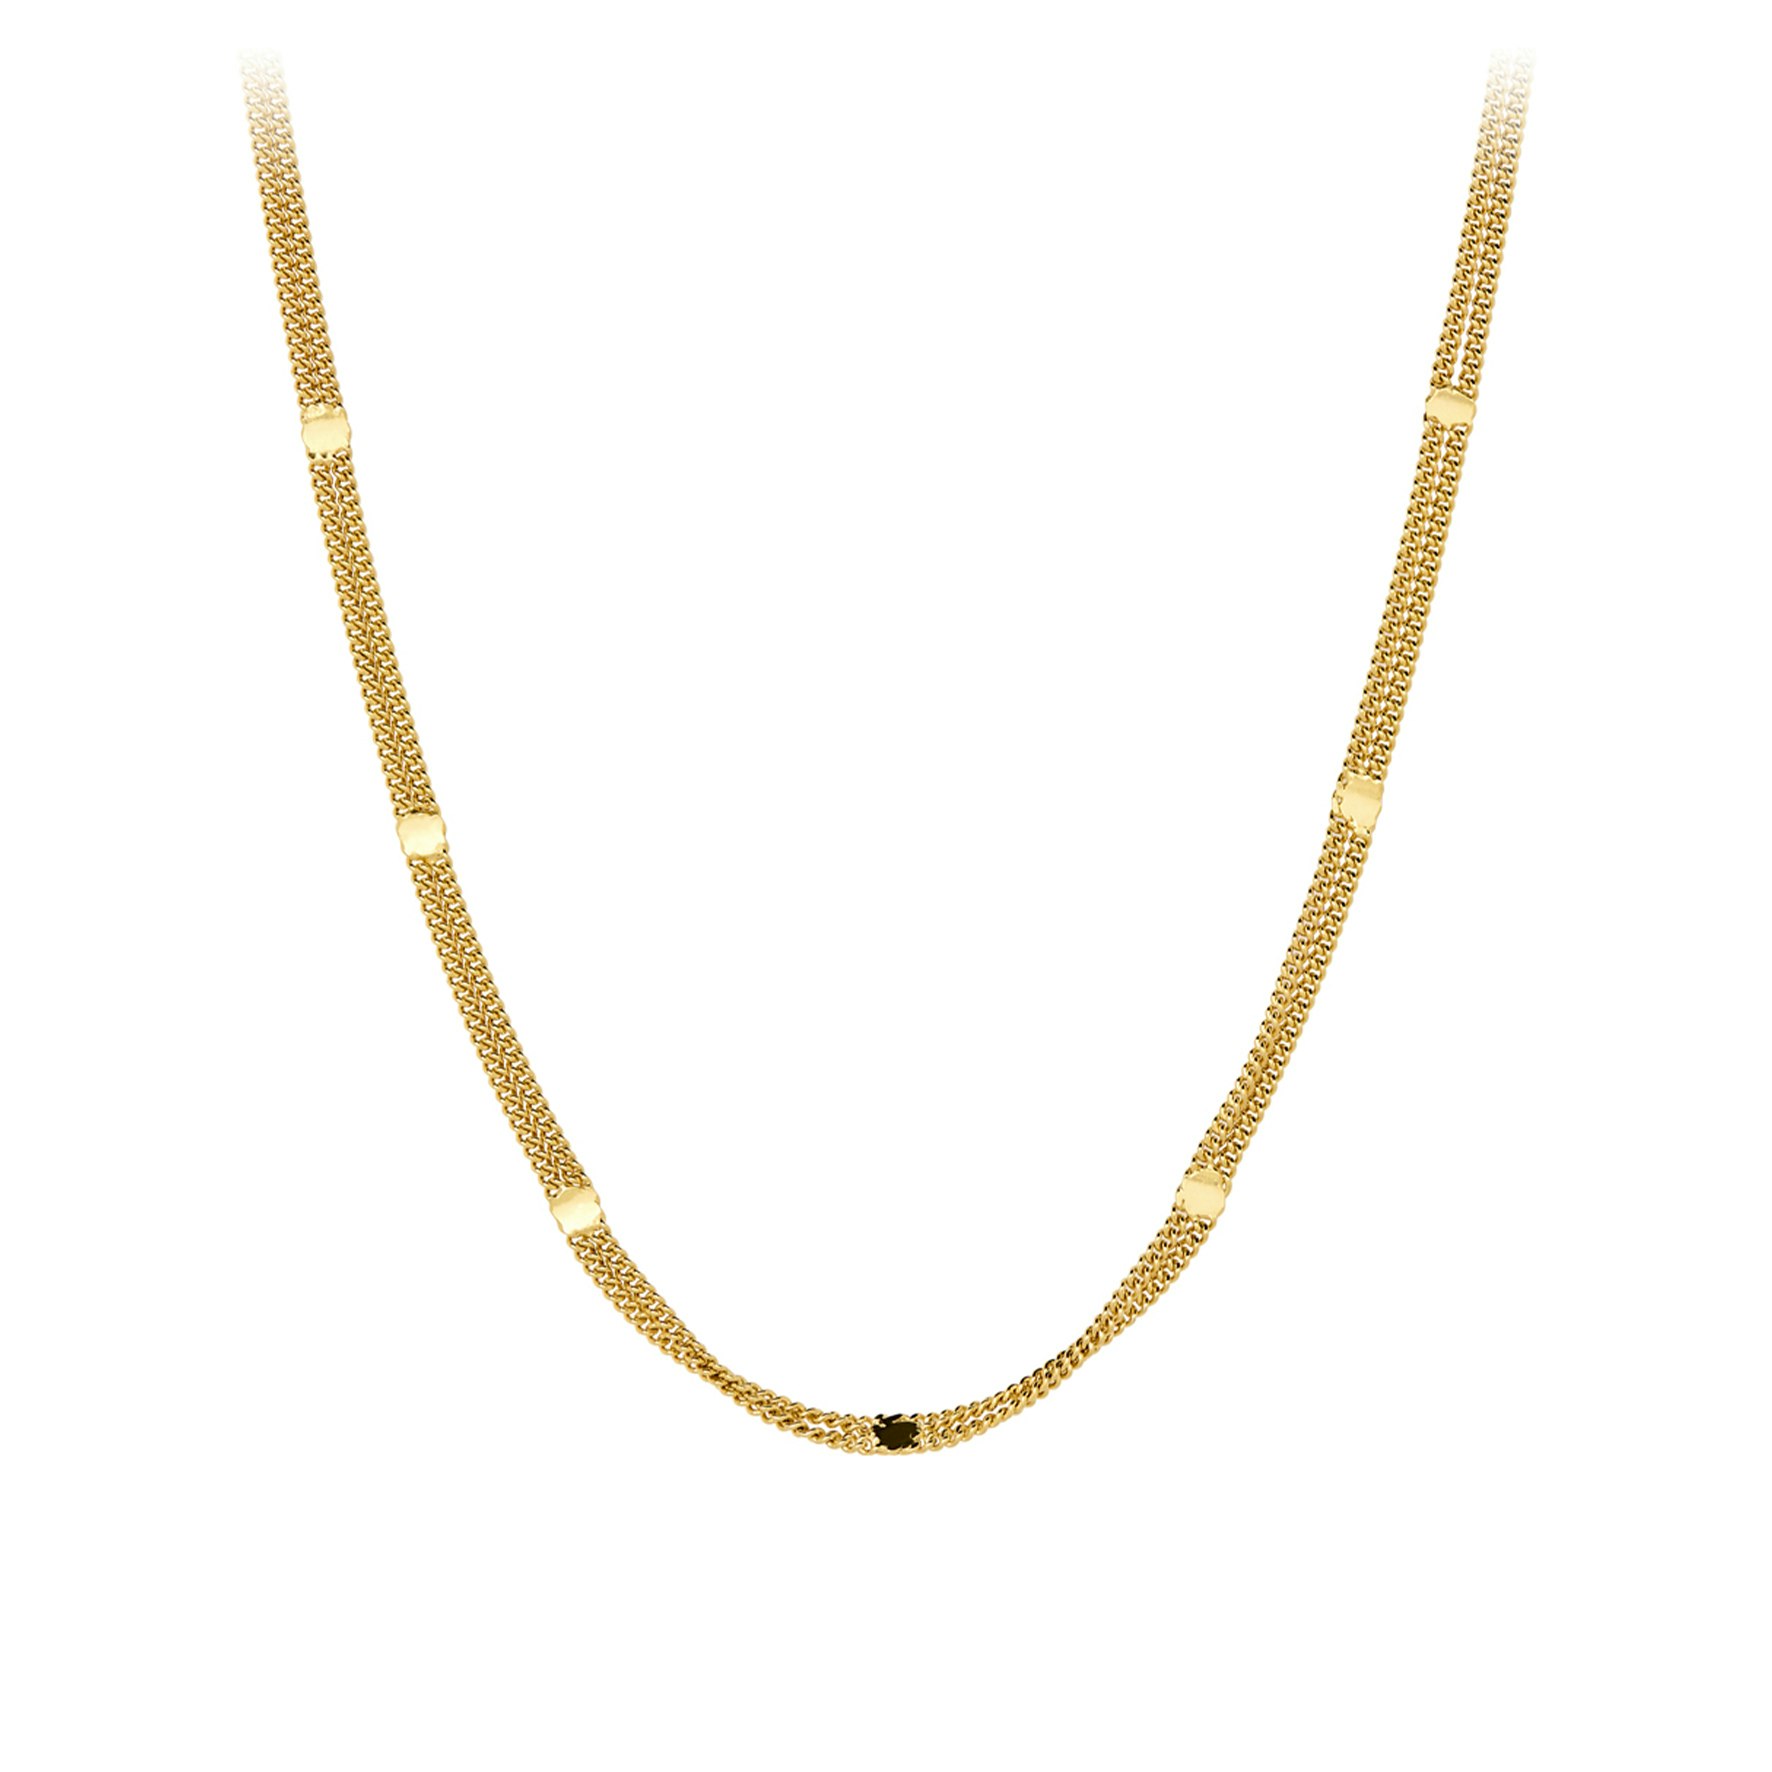 Agnes Necklace from Pernille Corydon in Goldplated-Silver Sterling 925